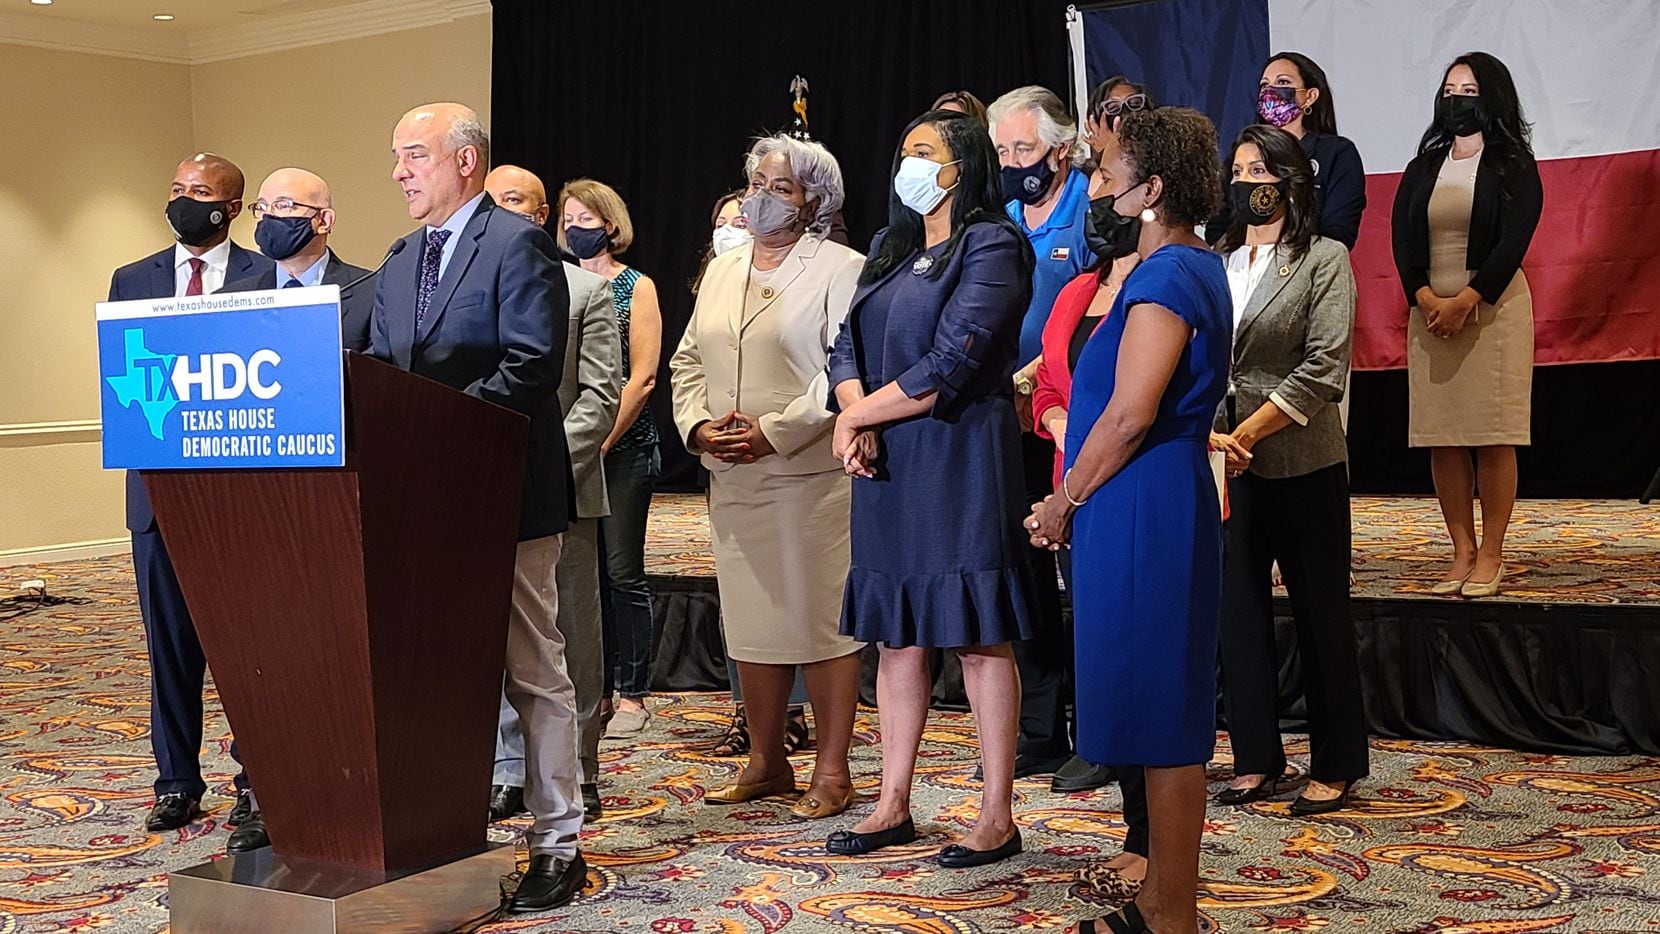 State Rep. Chris Turner of Grand Prairie, chair of the Texas House Democratic Caucus, with 18 colleagues, speaks with news media July 20, 2021, at the Washington Plaza hotel near the White House on day nine of their quorum break over voting rights.